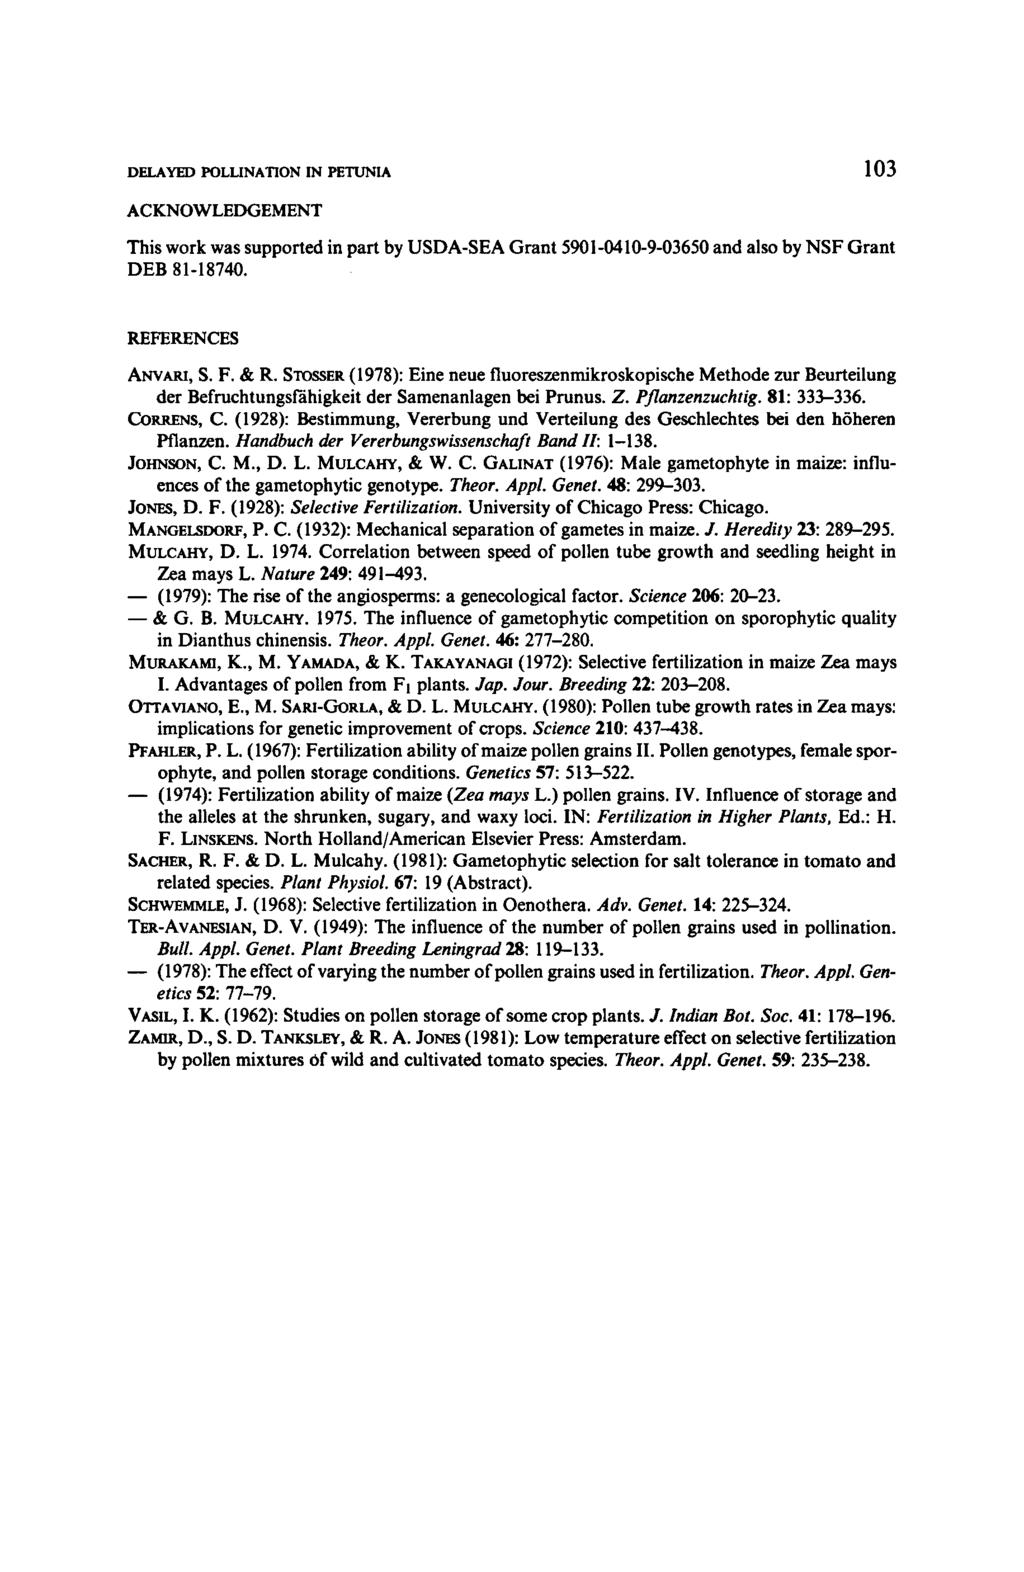 (1979): & (1974): (1978): DELAYED POLLINATION IN PETUNIA 103 ACKNOWLEDGEMENT This work was supported in part by USDA-SEA Grant 5901-0410-9-03650 and also by NSF Grant DEB 81-18740.